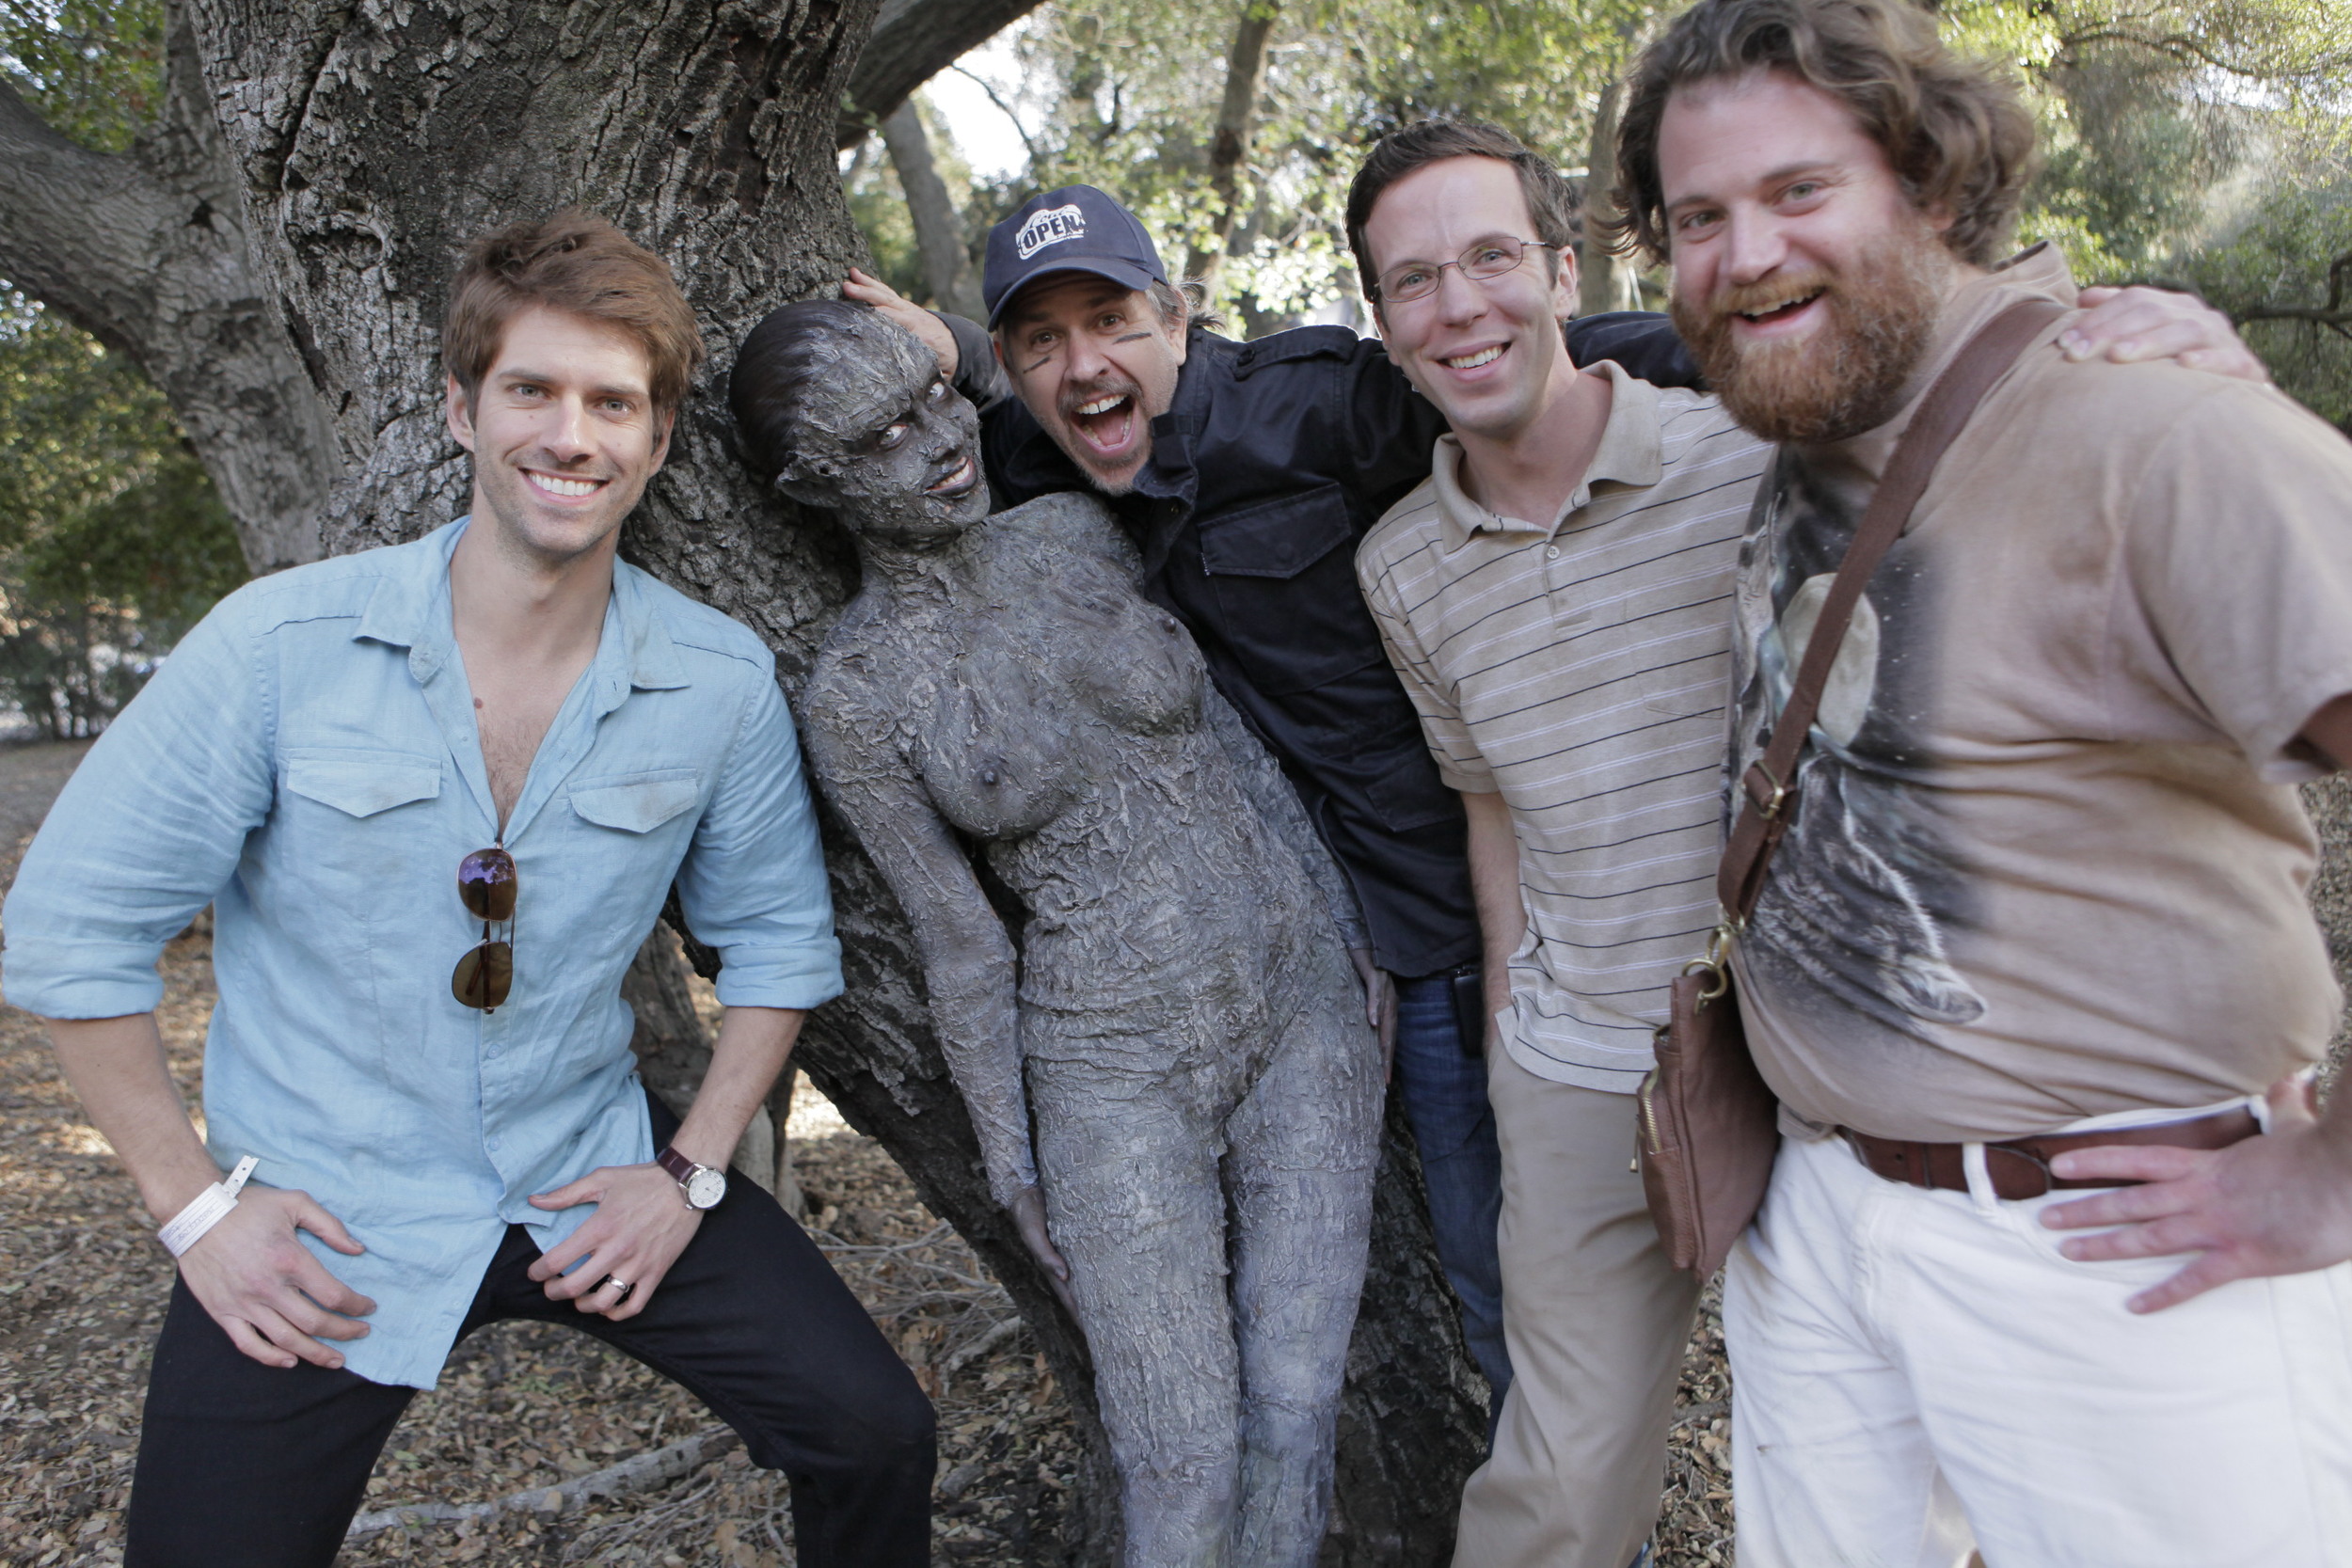 With Ross Nathan, Kayden Kross (the tree), Ben Begley and Herbie Russell on The Hungover Games